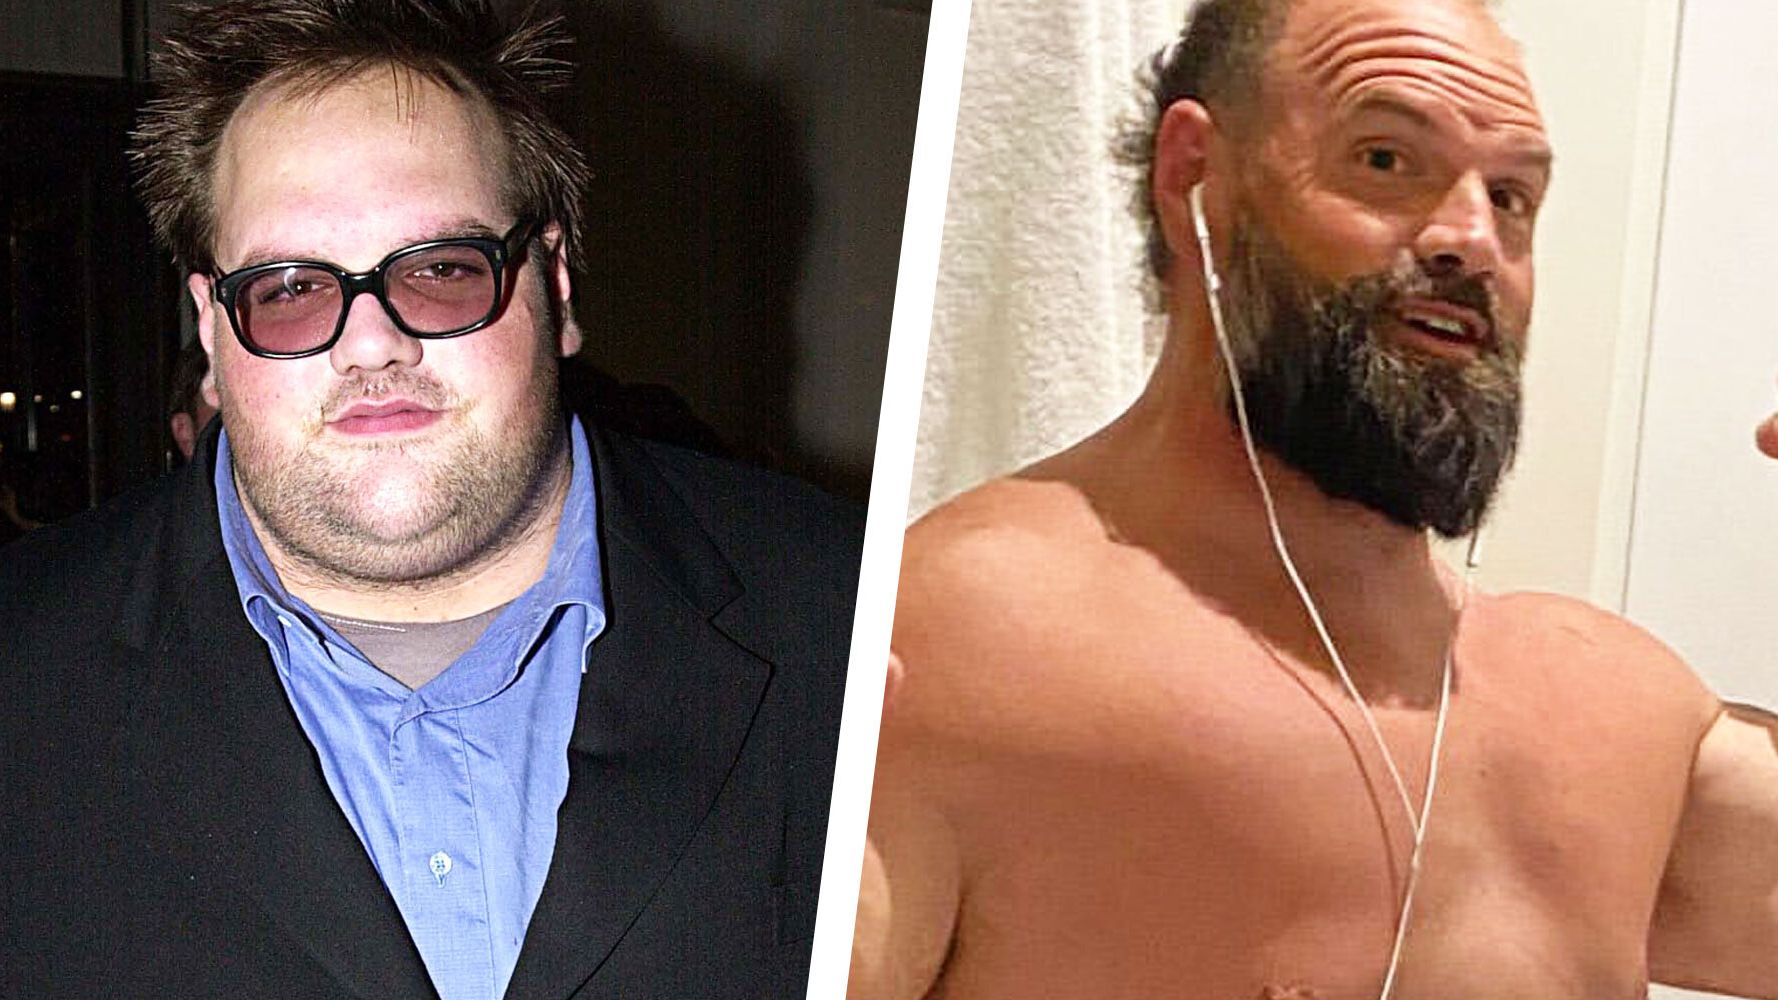 The Ultimate Secret to Weight Loss Revealed — From Someone Who Lost 70 lbs